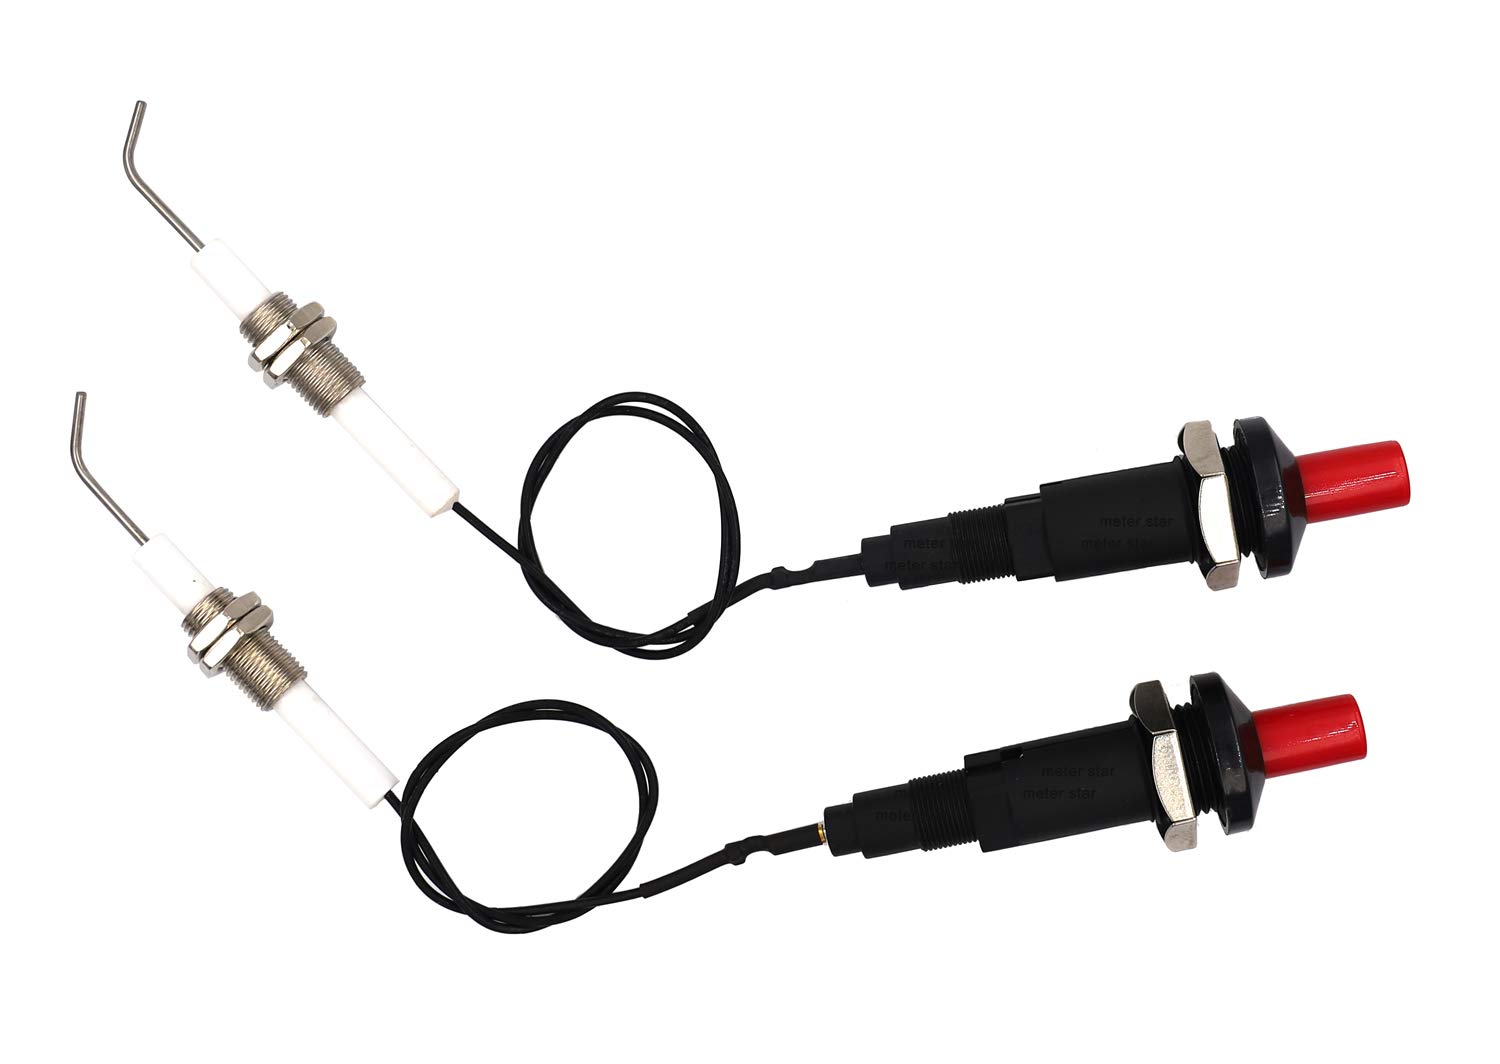 METER STAR Gas Grill/Range/Heater/Grill Igniters,Push Button Piezo Igniter with Threaded Universal Ceramic Electrode Ignition Spark Plug Wire Long 11.8” Electronic Device Set of 2